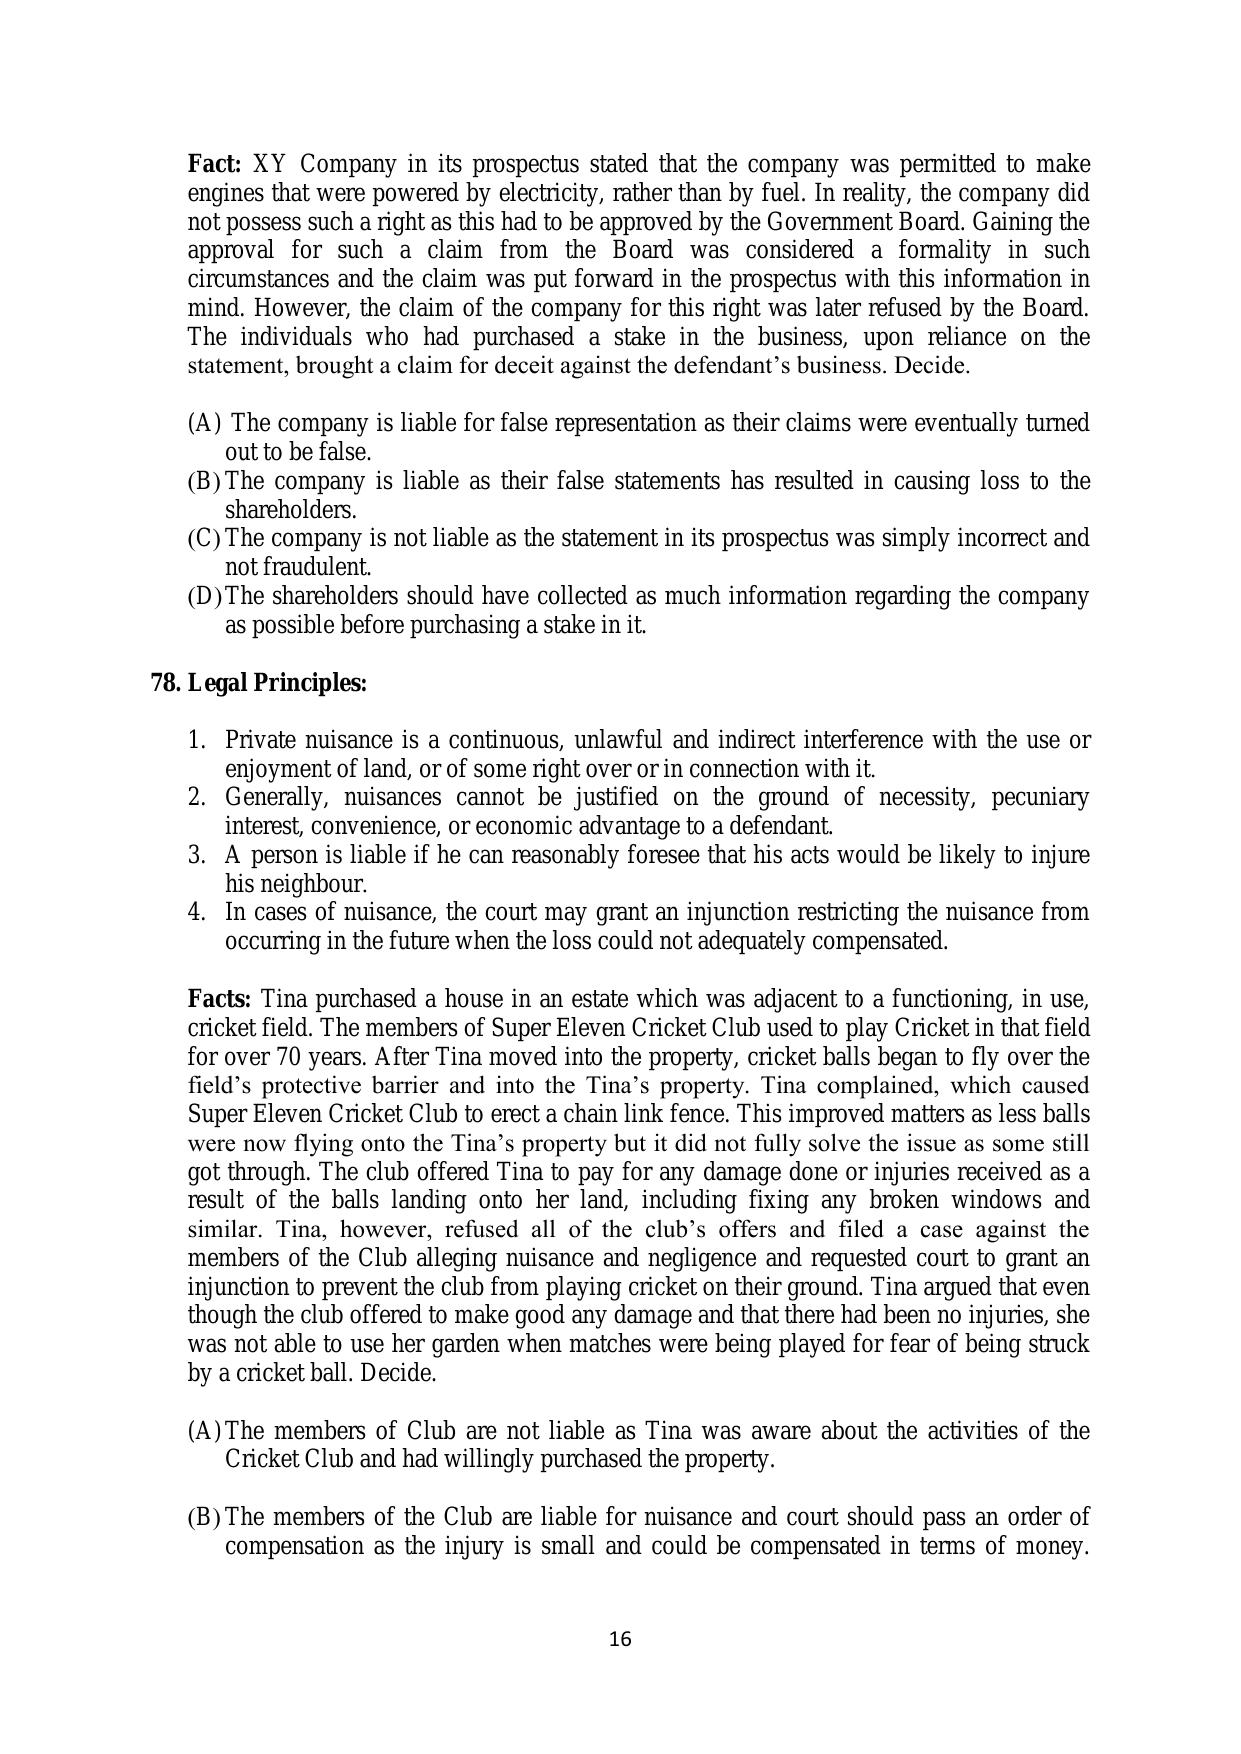 AILET 2020 Question Paper for BA LLB - Page 16